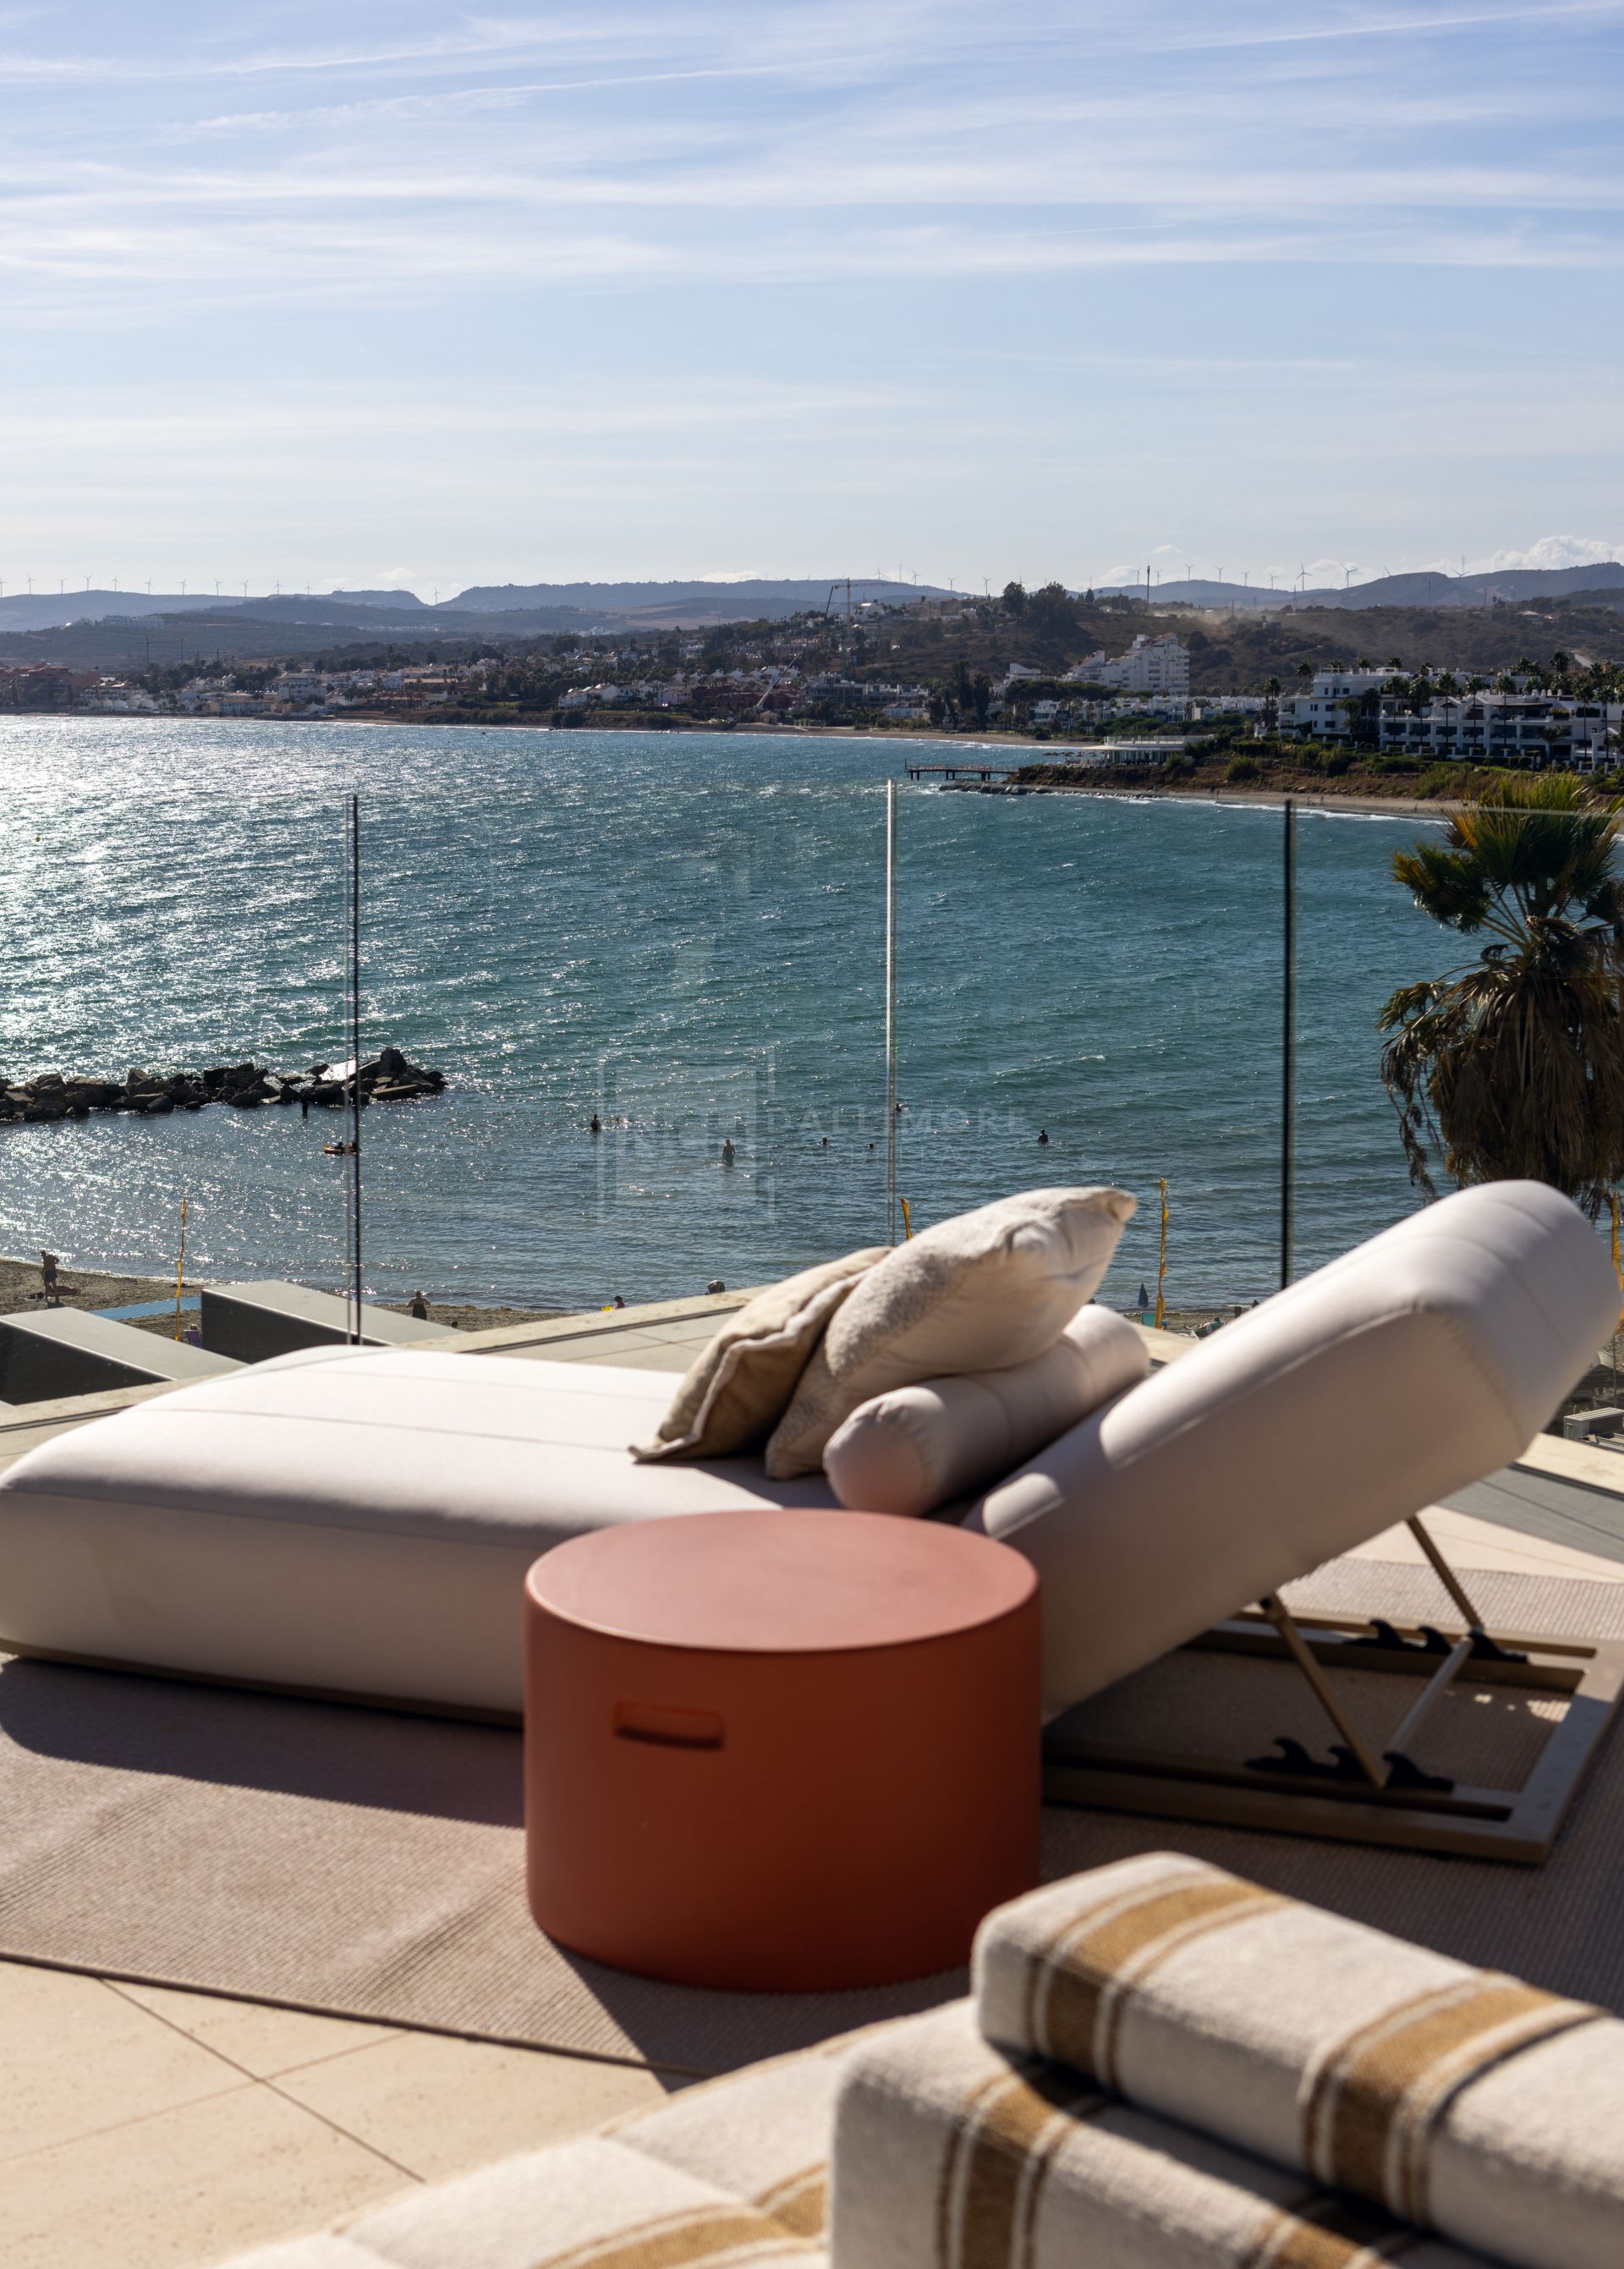 ULTRA LUXURY 3BEDROOM PENTHOUSE APARTMENT FRONTLINE BEACH CLOSE TO ESTEPONA TOWN